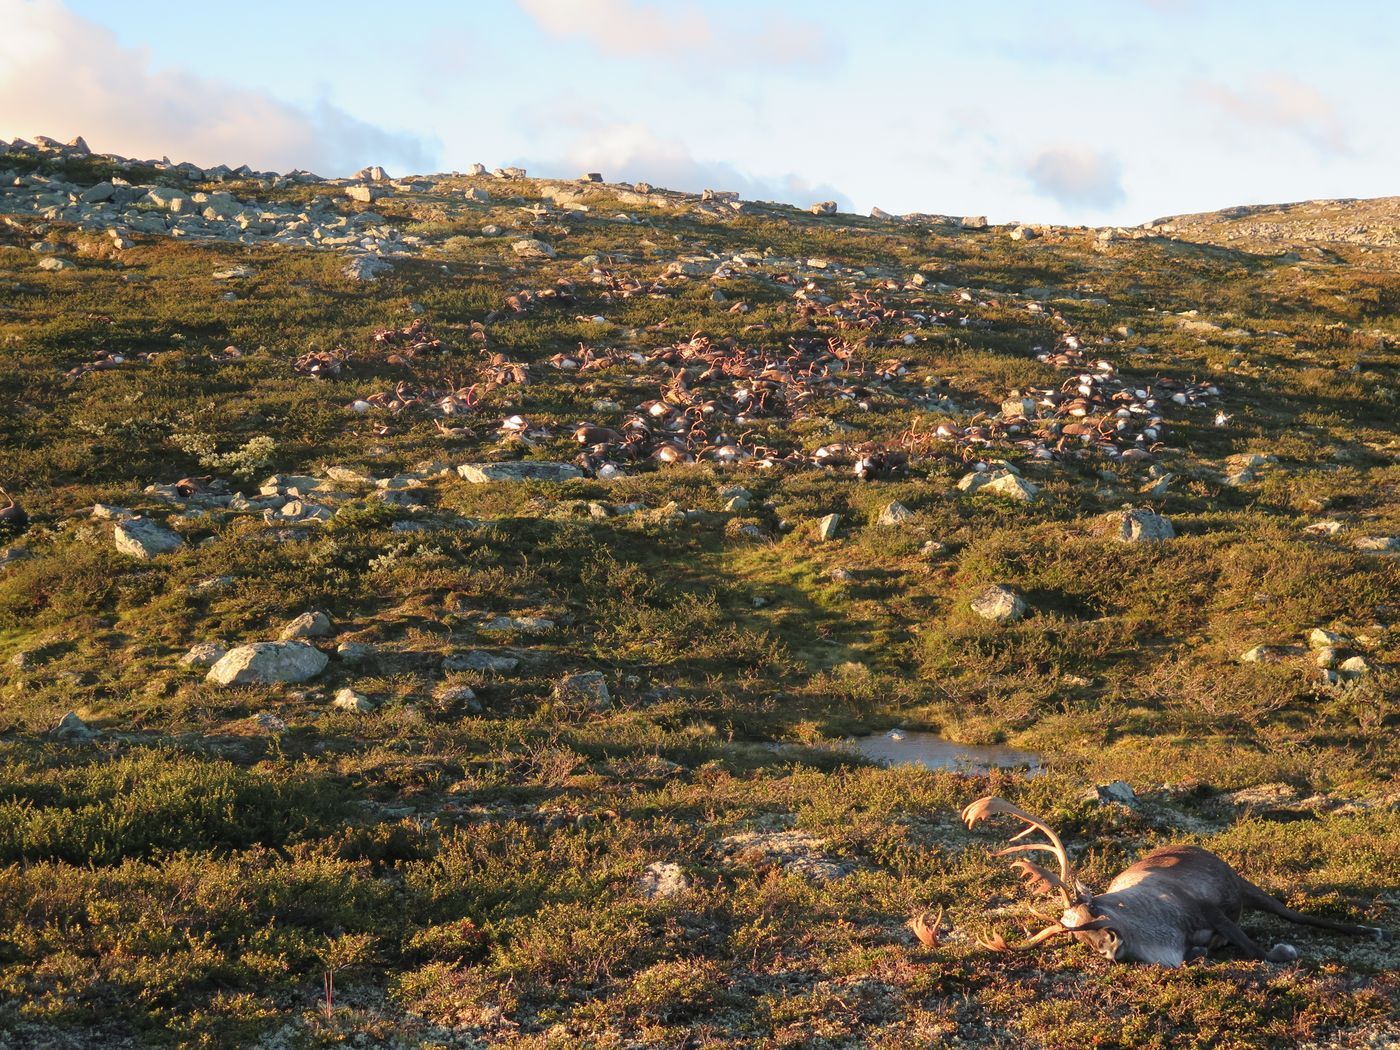 A photograph taken of the 323 deceased reindeer from Norway.